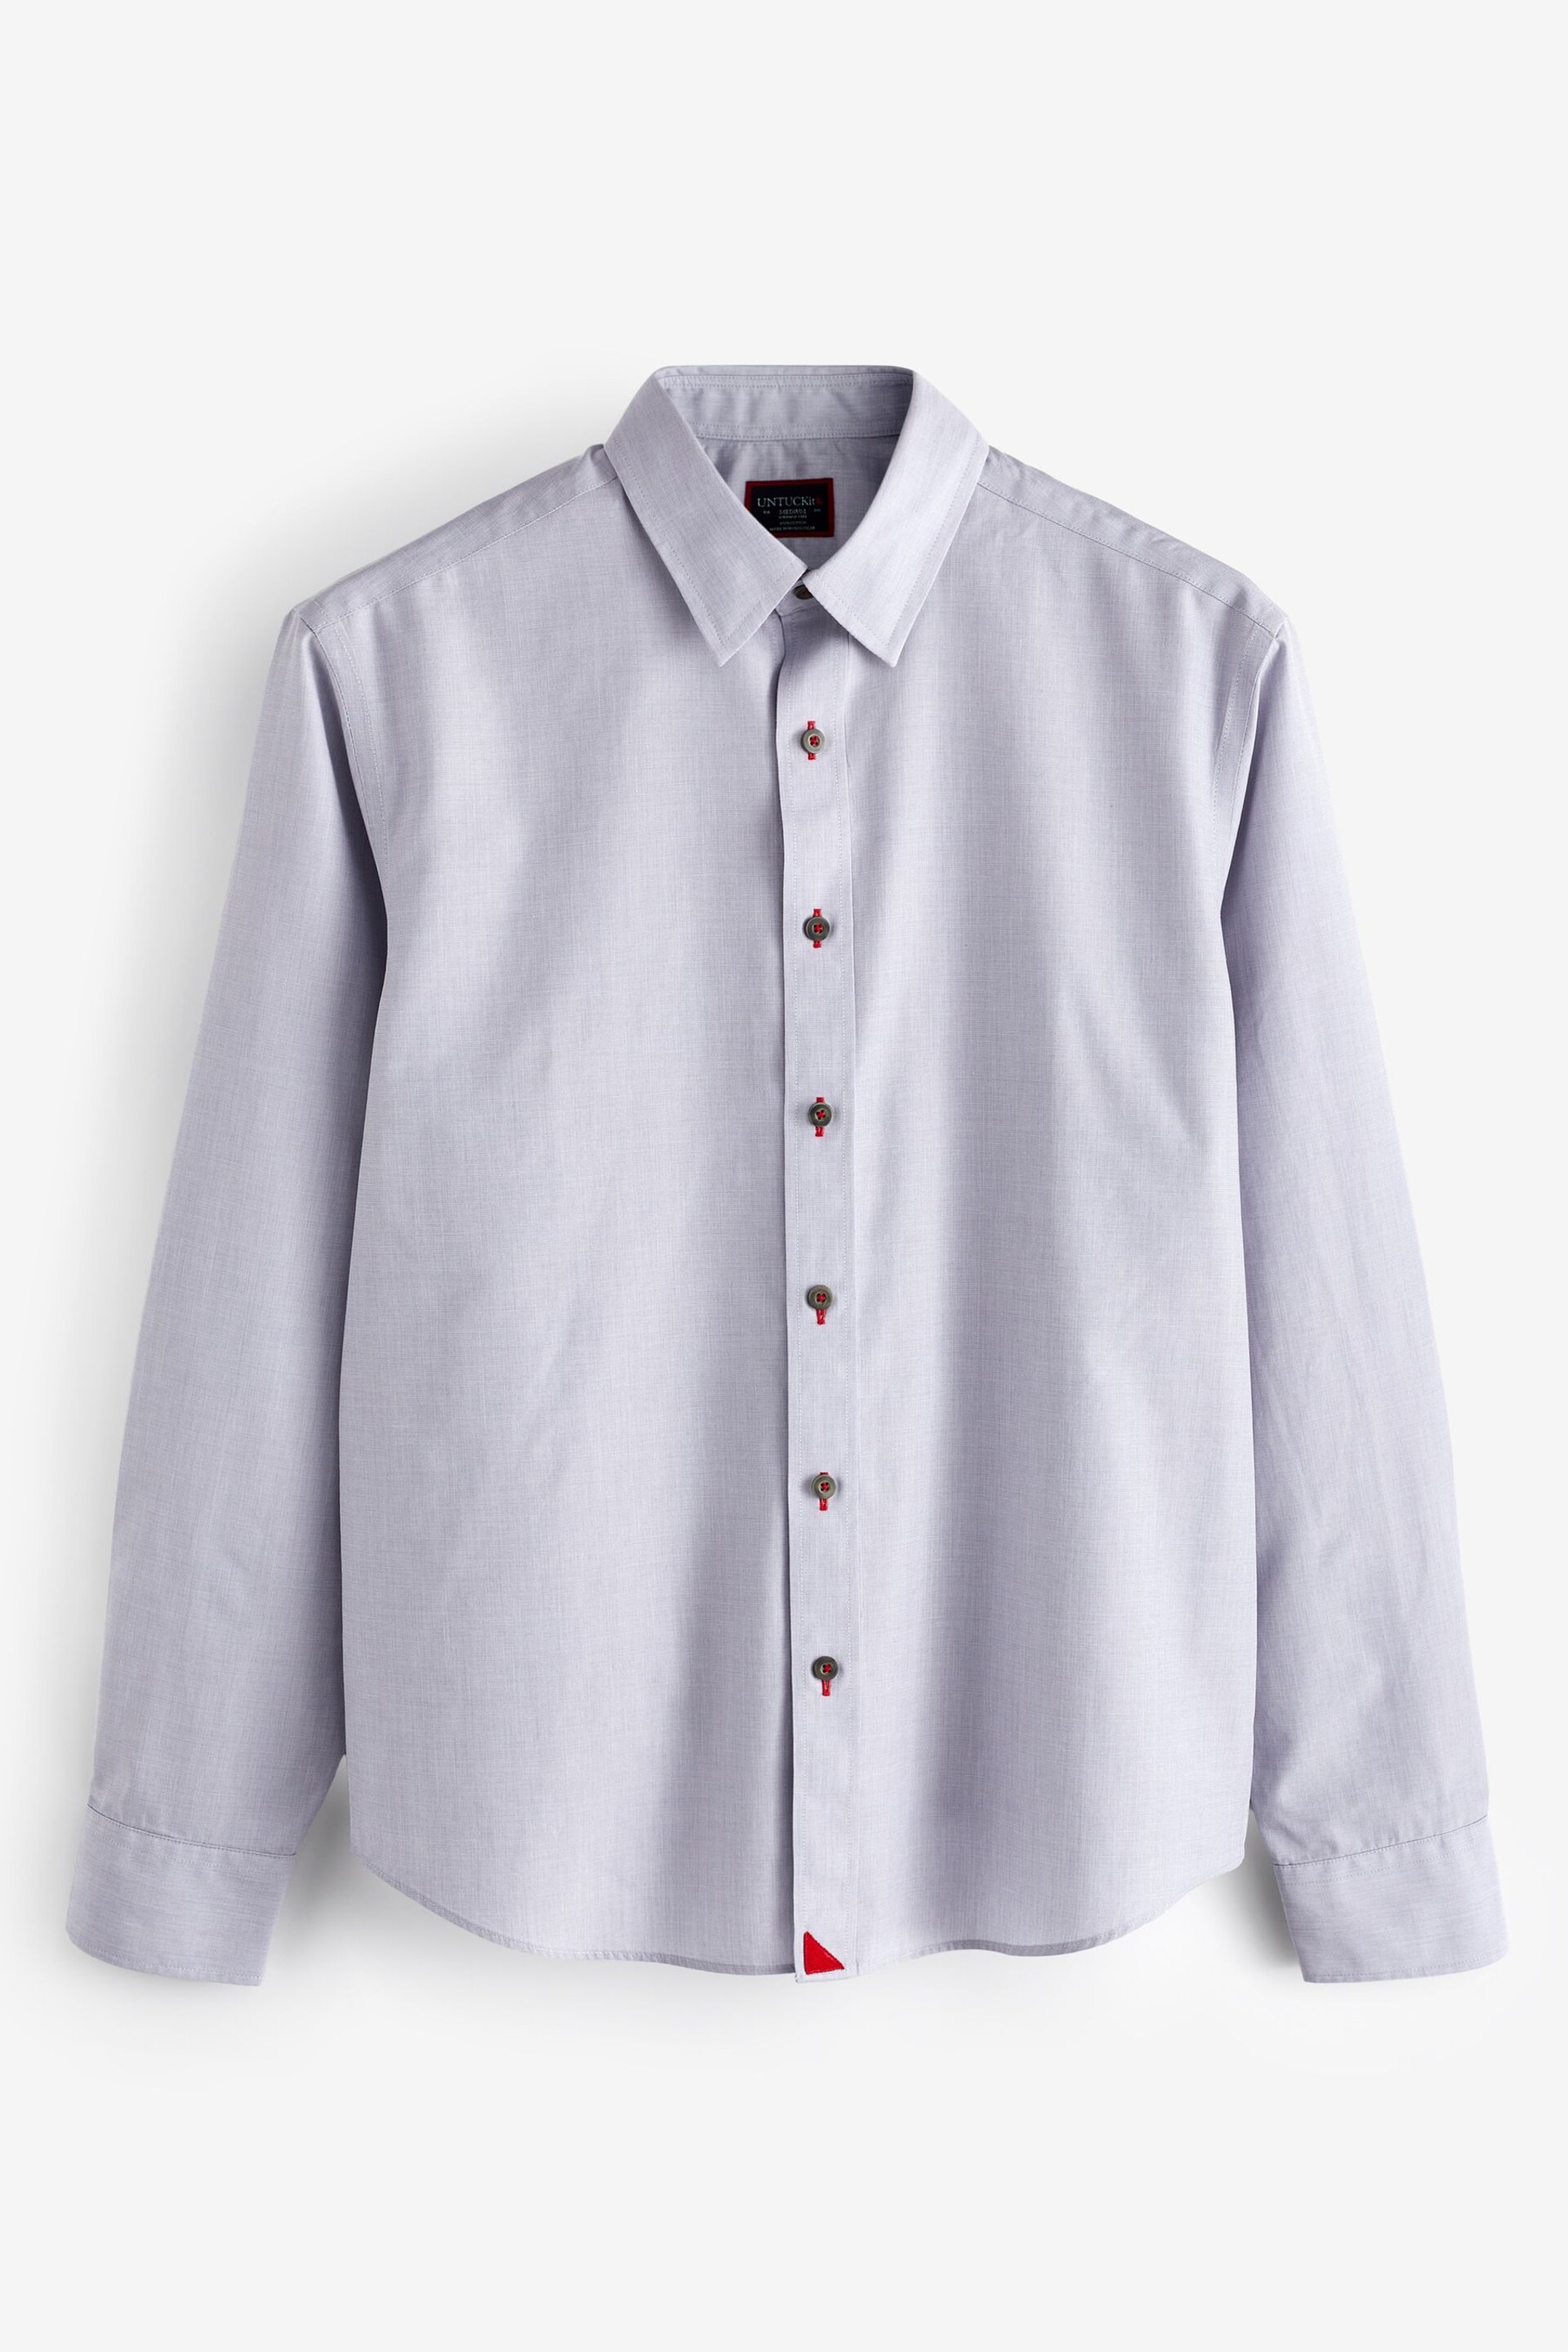 UNTUCKit Grey Light Wrinkle-Free Relaxed Fit Rubican Shirt - Image 6 of 6